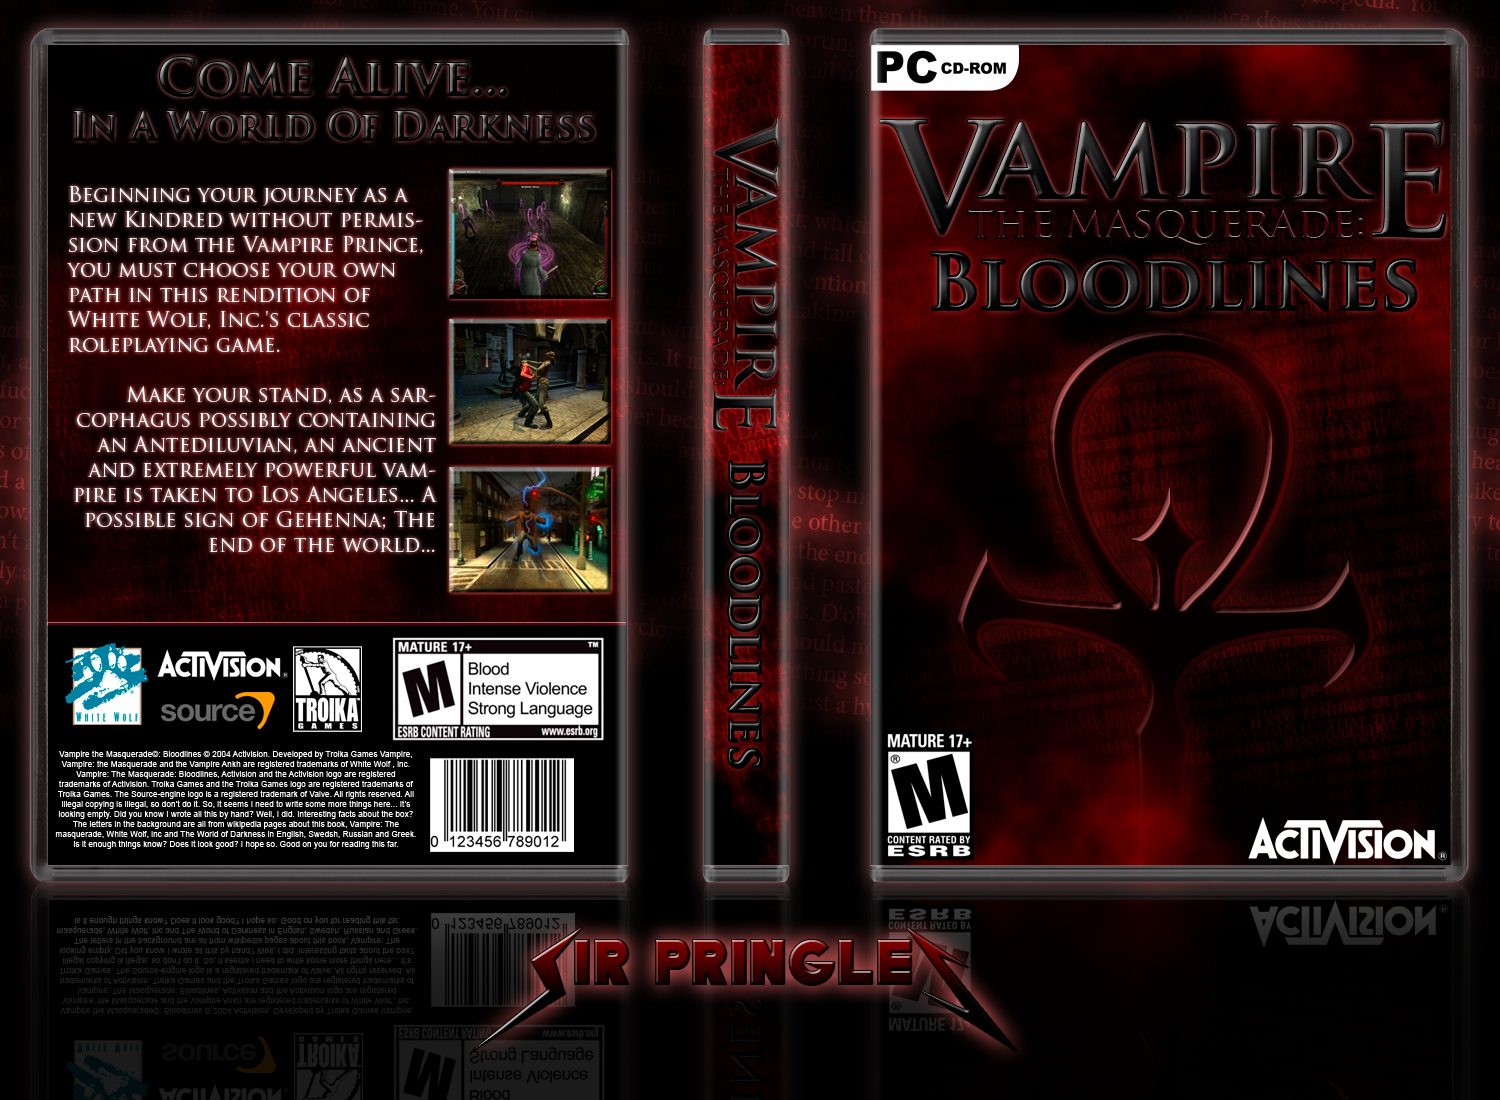 Vampire: The Masquerade - Bloodlines box cover